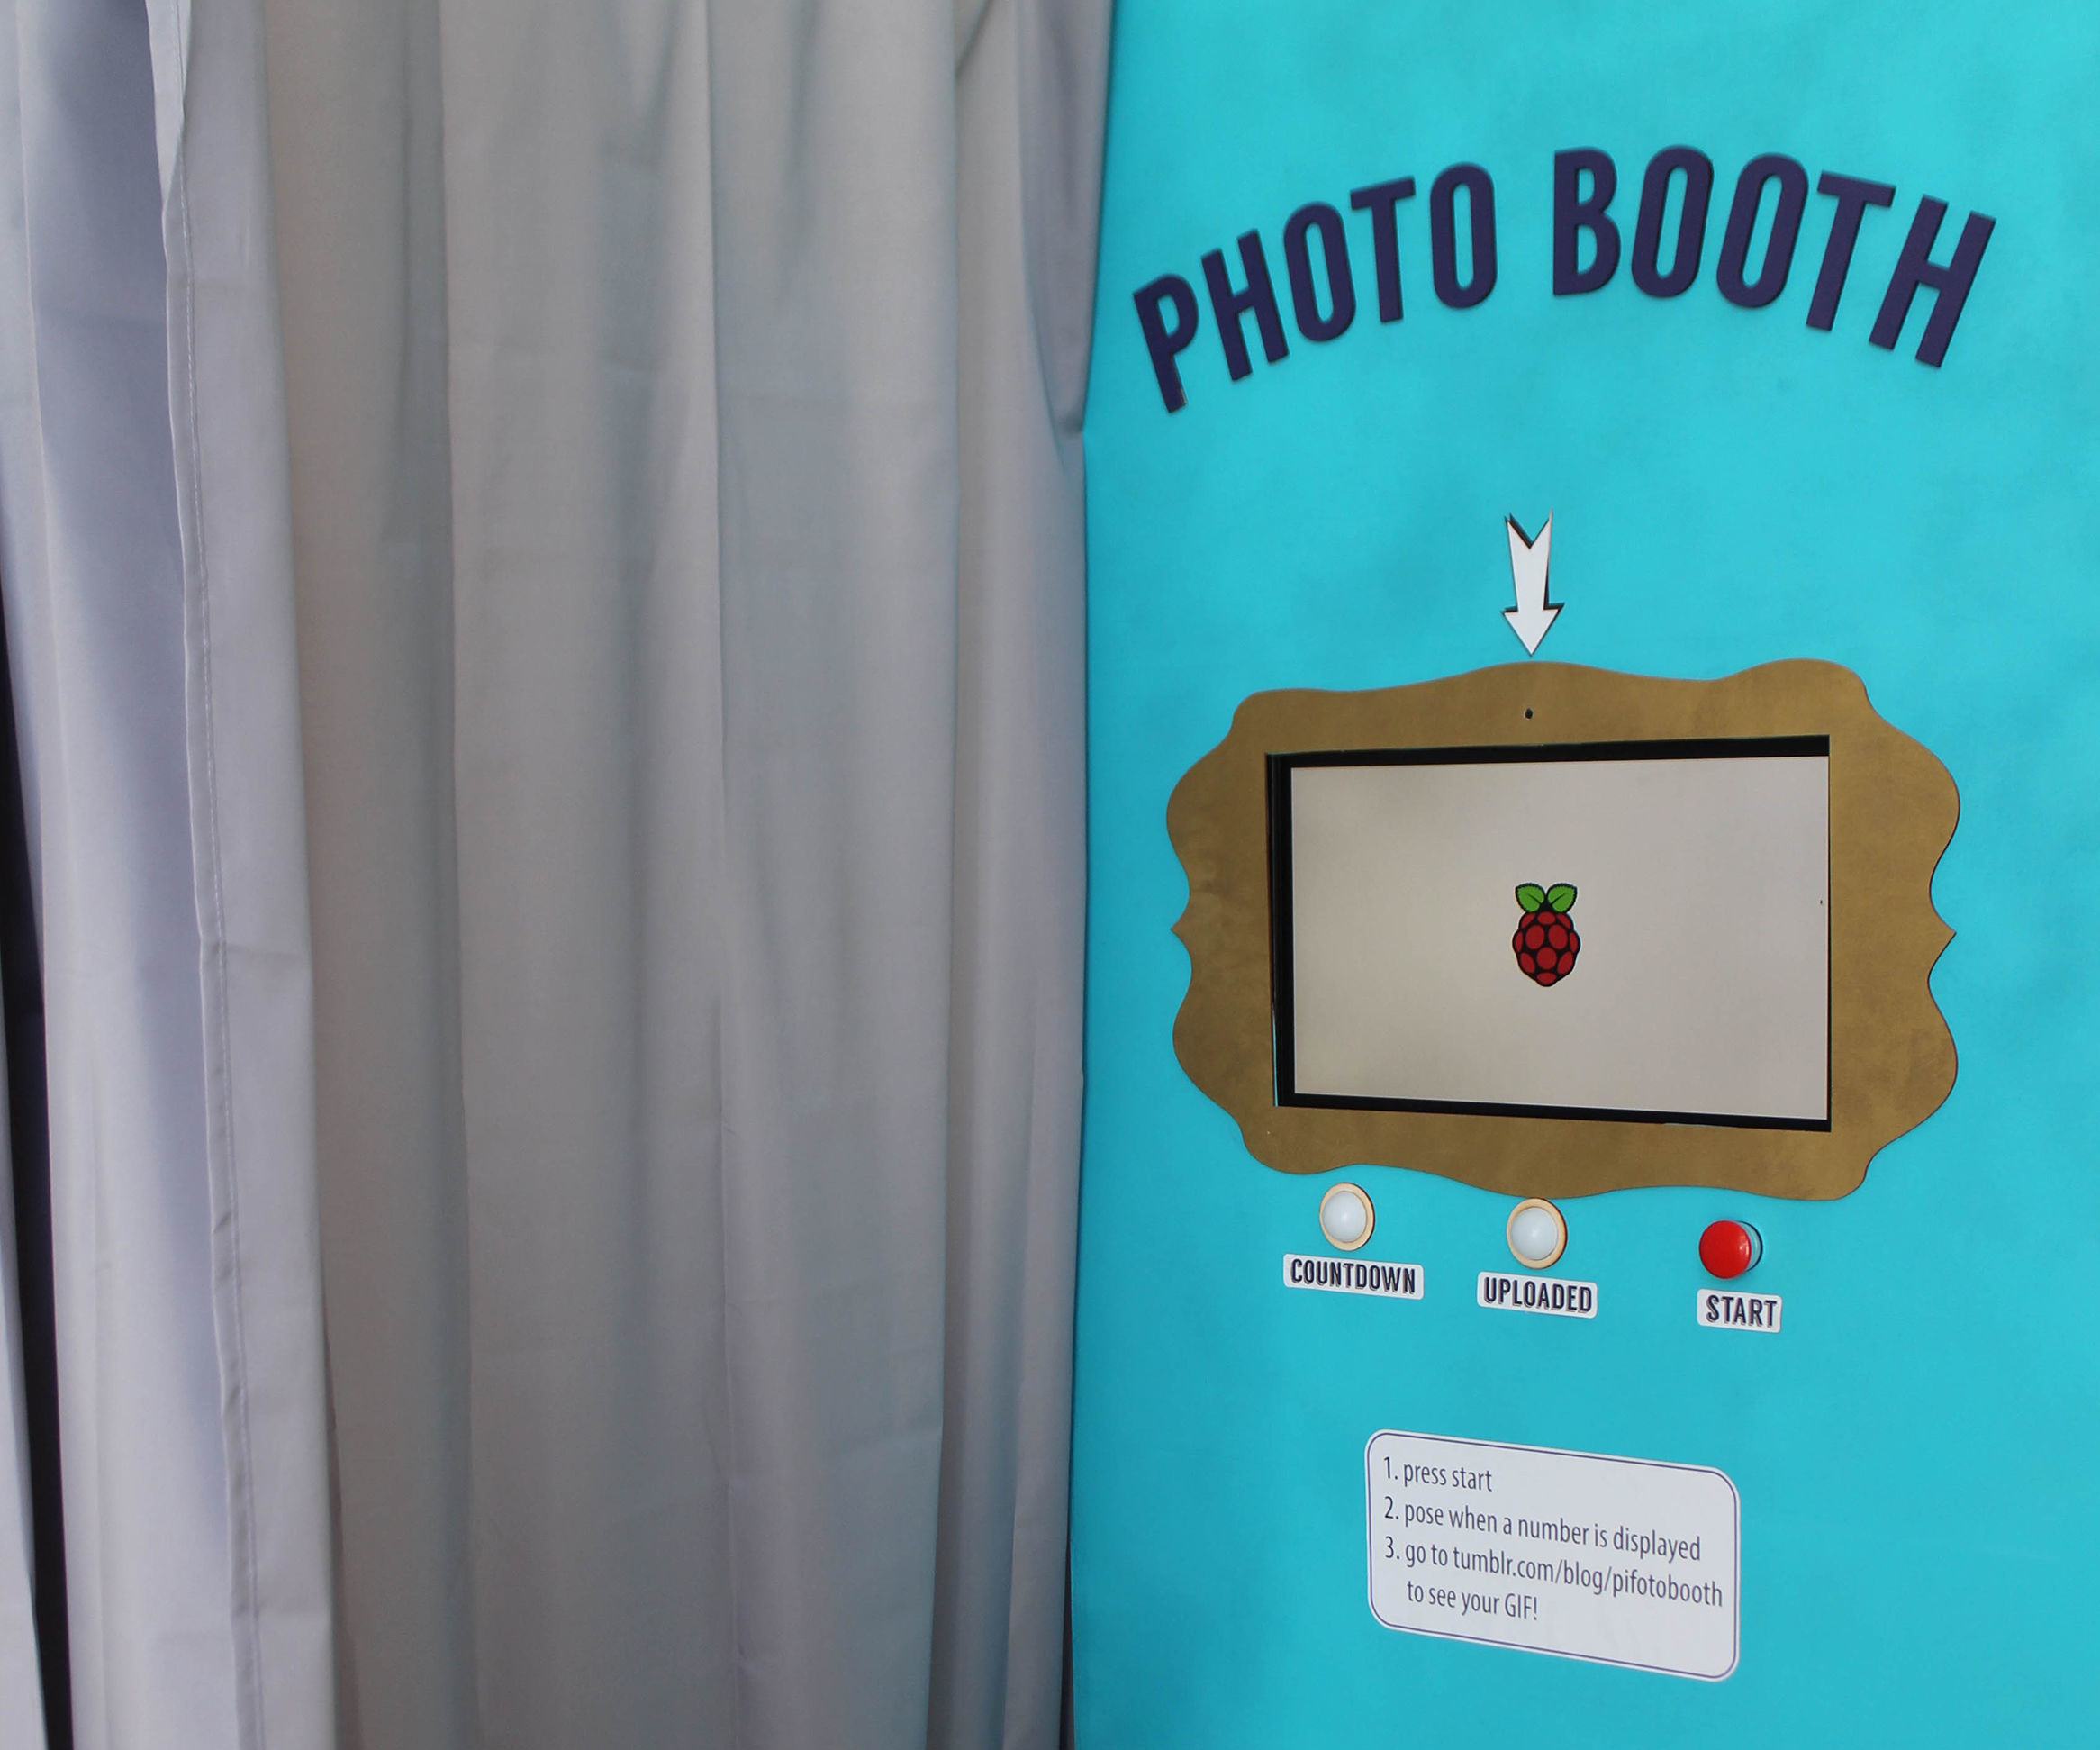 Build a Photo Booth!